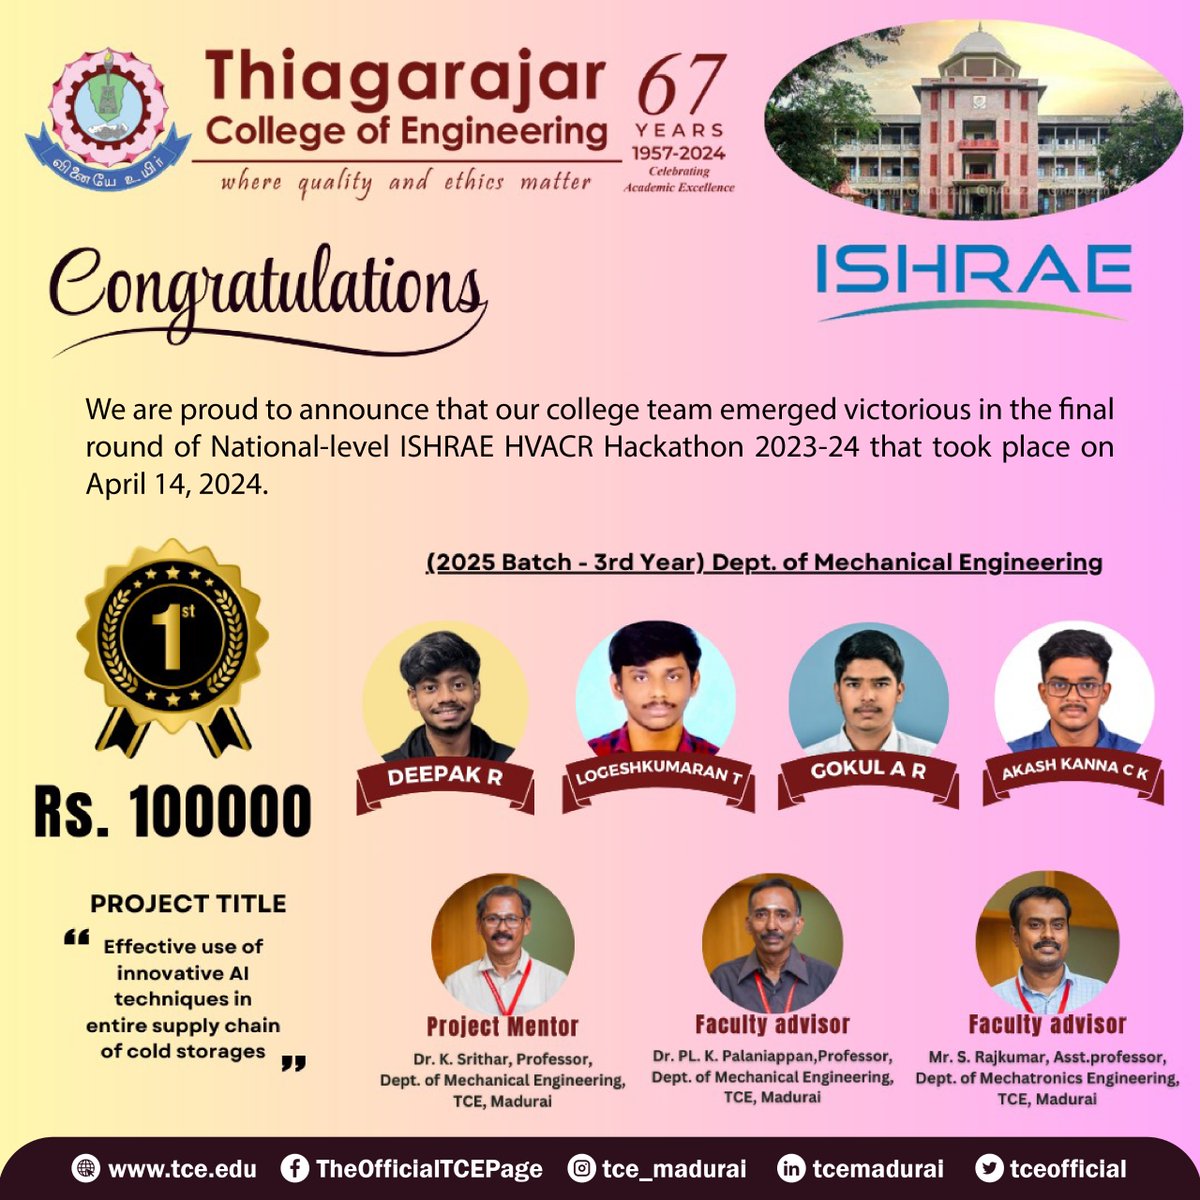 TCE Mechanical Eng. students won 1st prize in ISHRAE HVACR Hackathon 2023-24 for AI in cold storage supply chain, earning Rs.1,00,000! Congrats! 🥇👏 #TCEPride